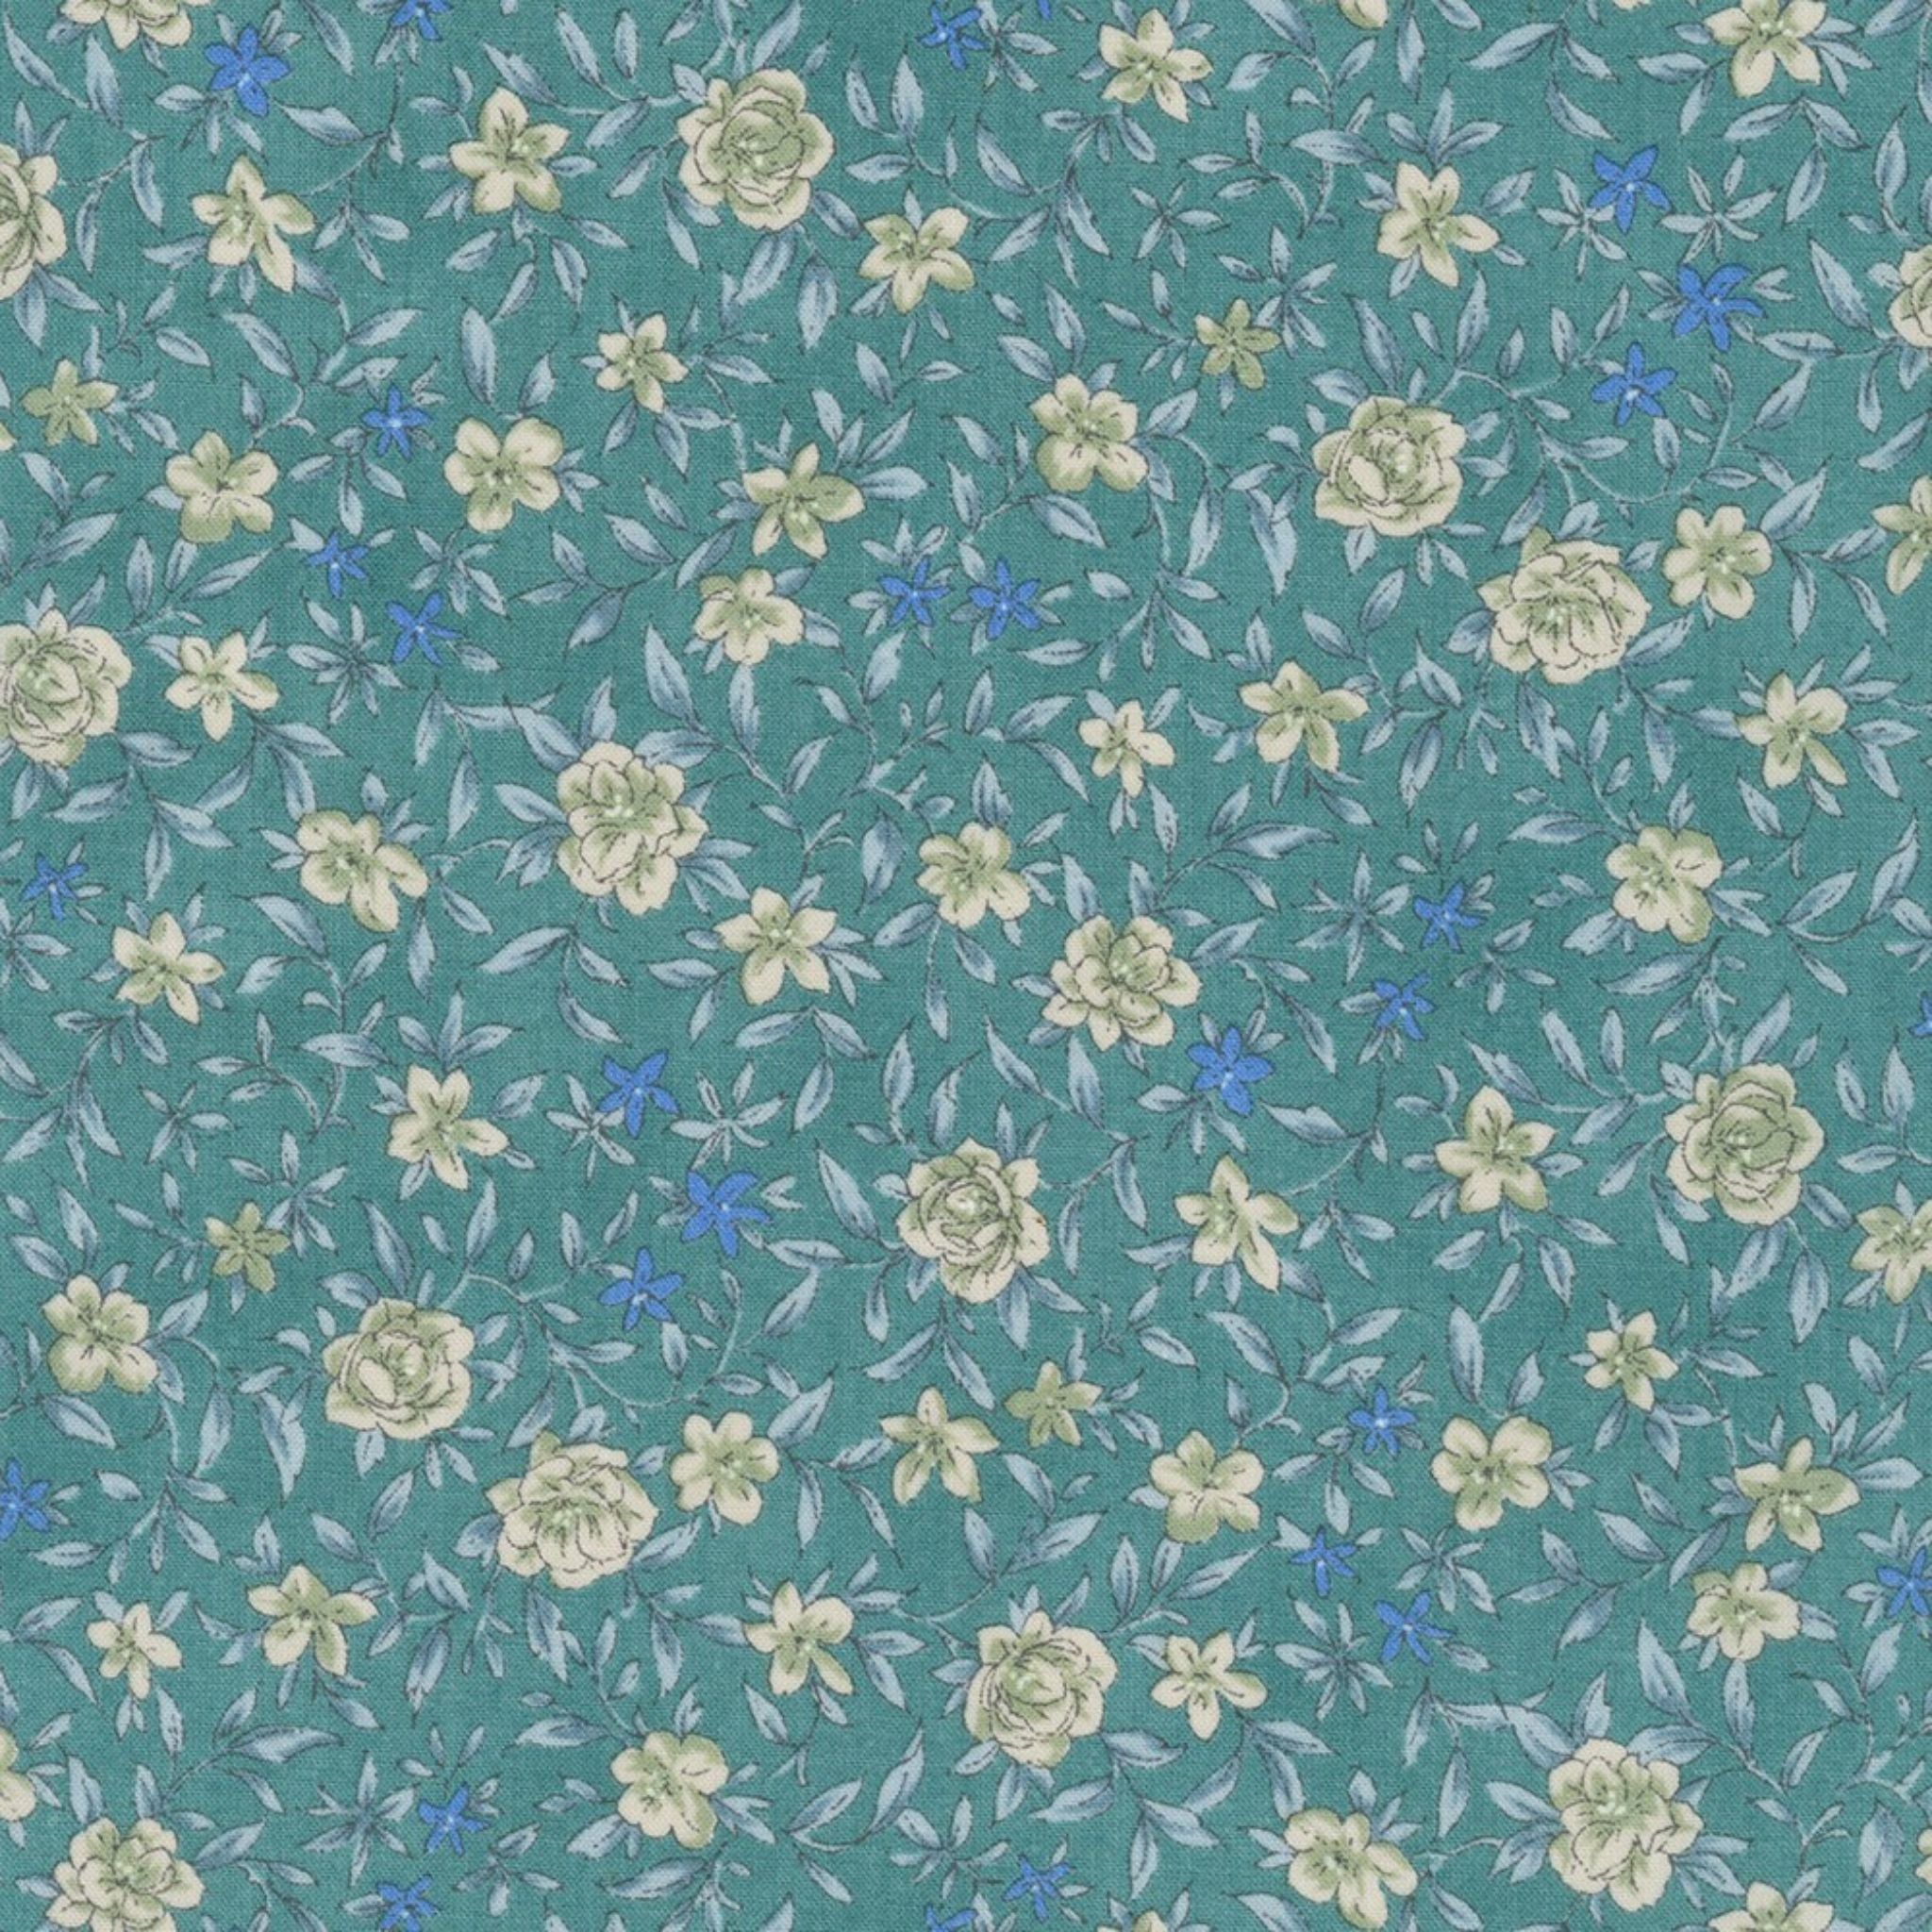 Teal cotton lawn with small cream and blue flowers - Petite Nostalgis Lawn by Sevenberry